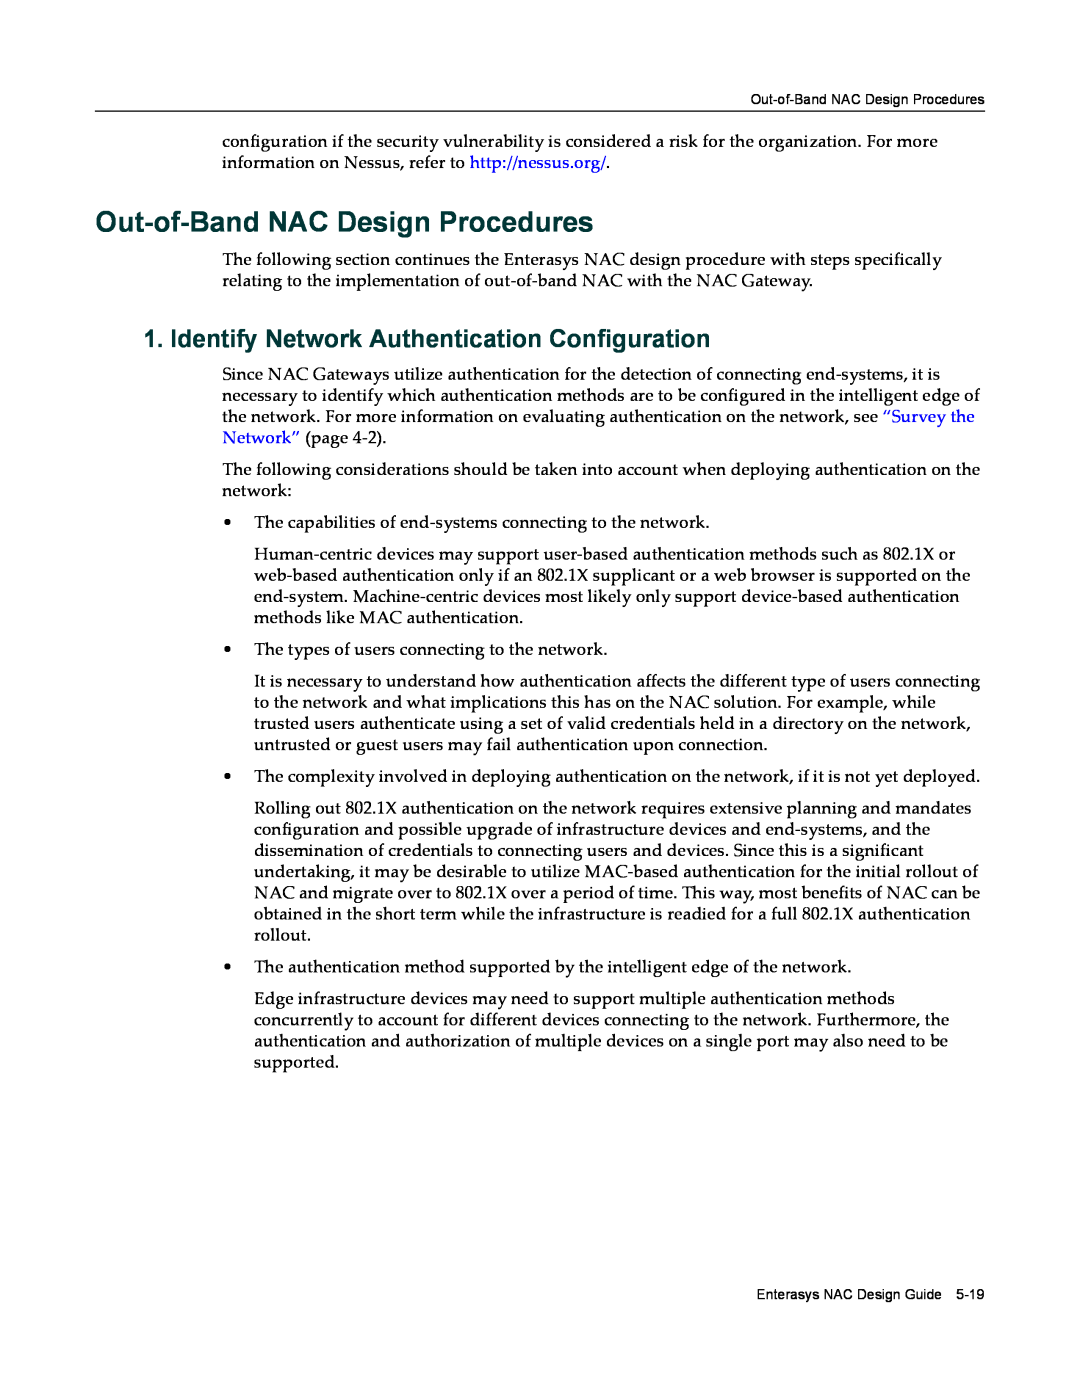 Enterasys Networks 9034385 manual Out-of-Band NAC Design Procedures, Identify Network Authentication Configuration 